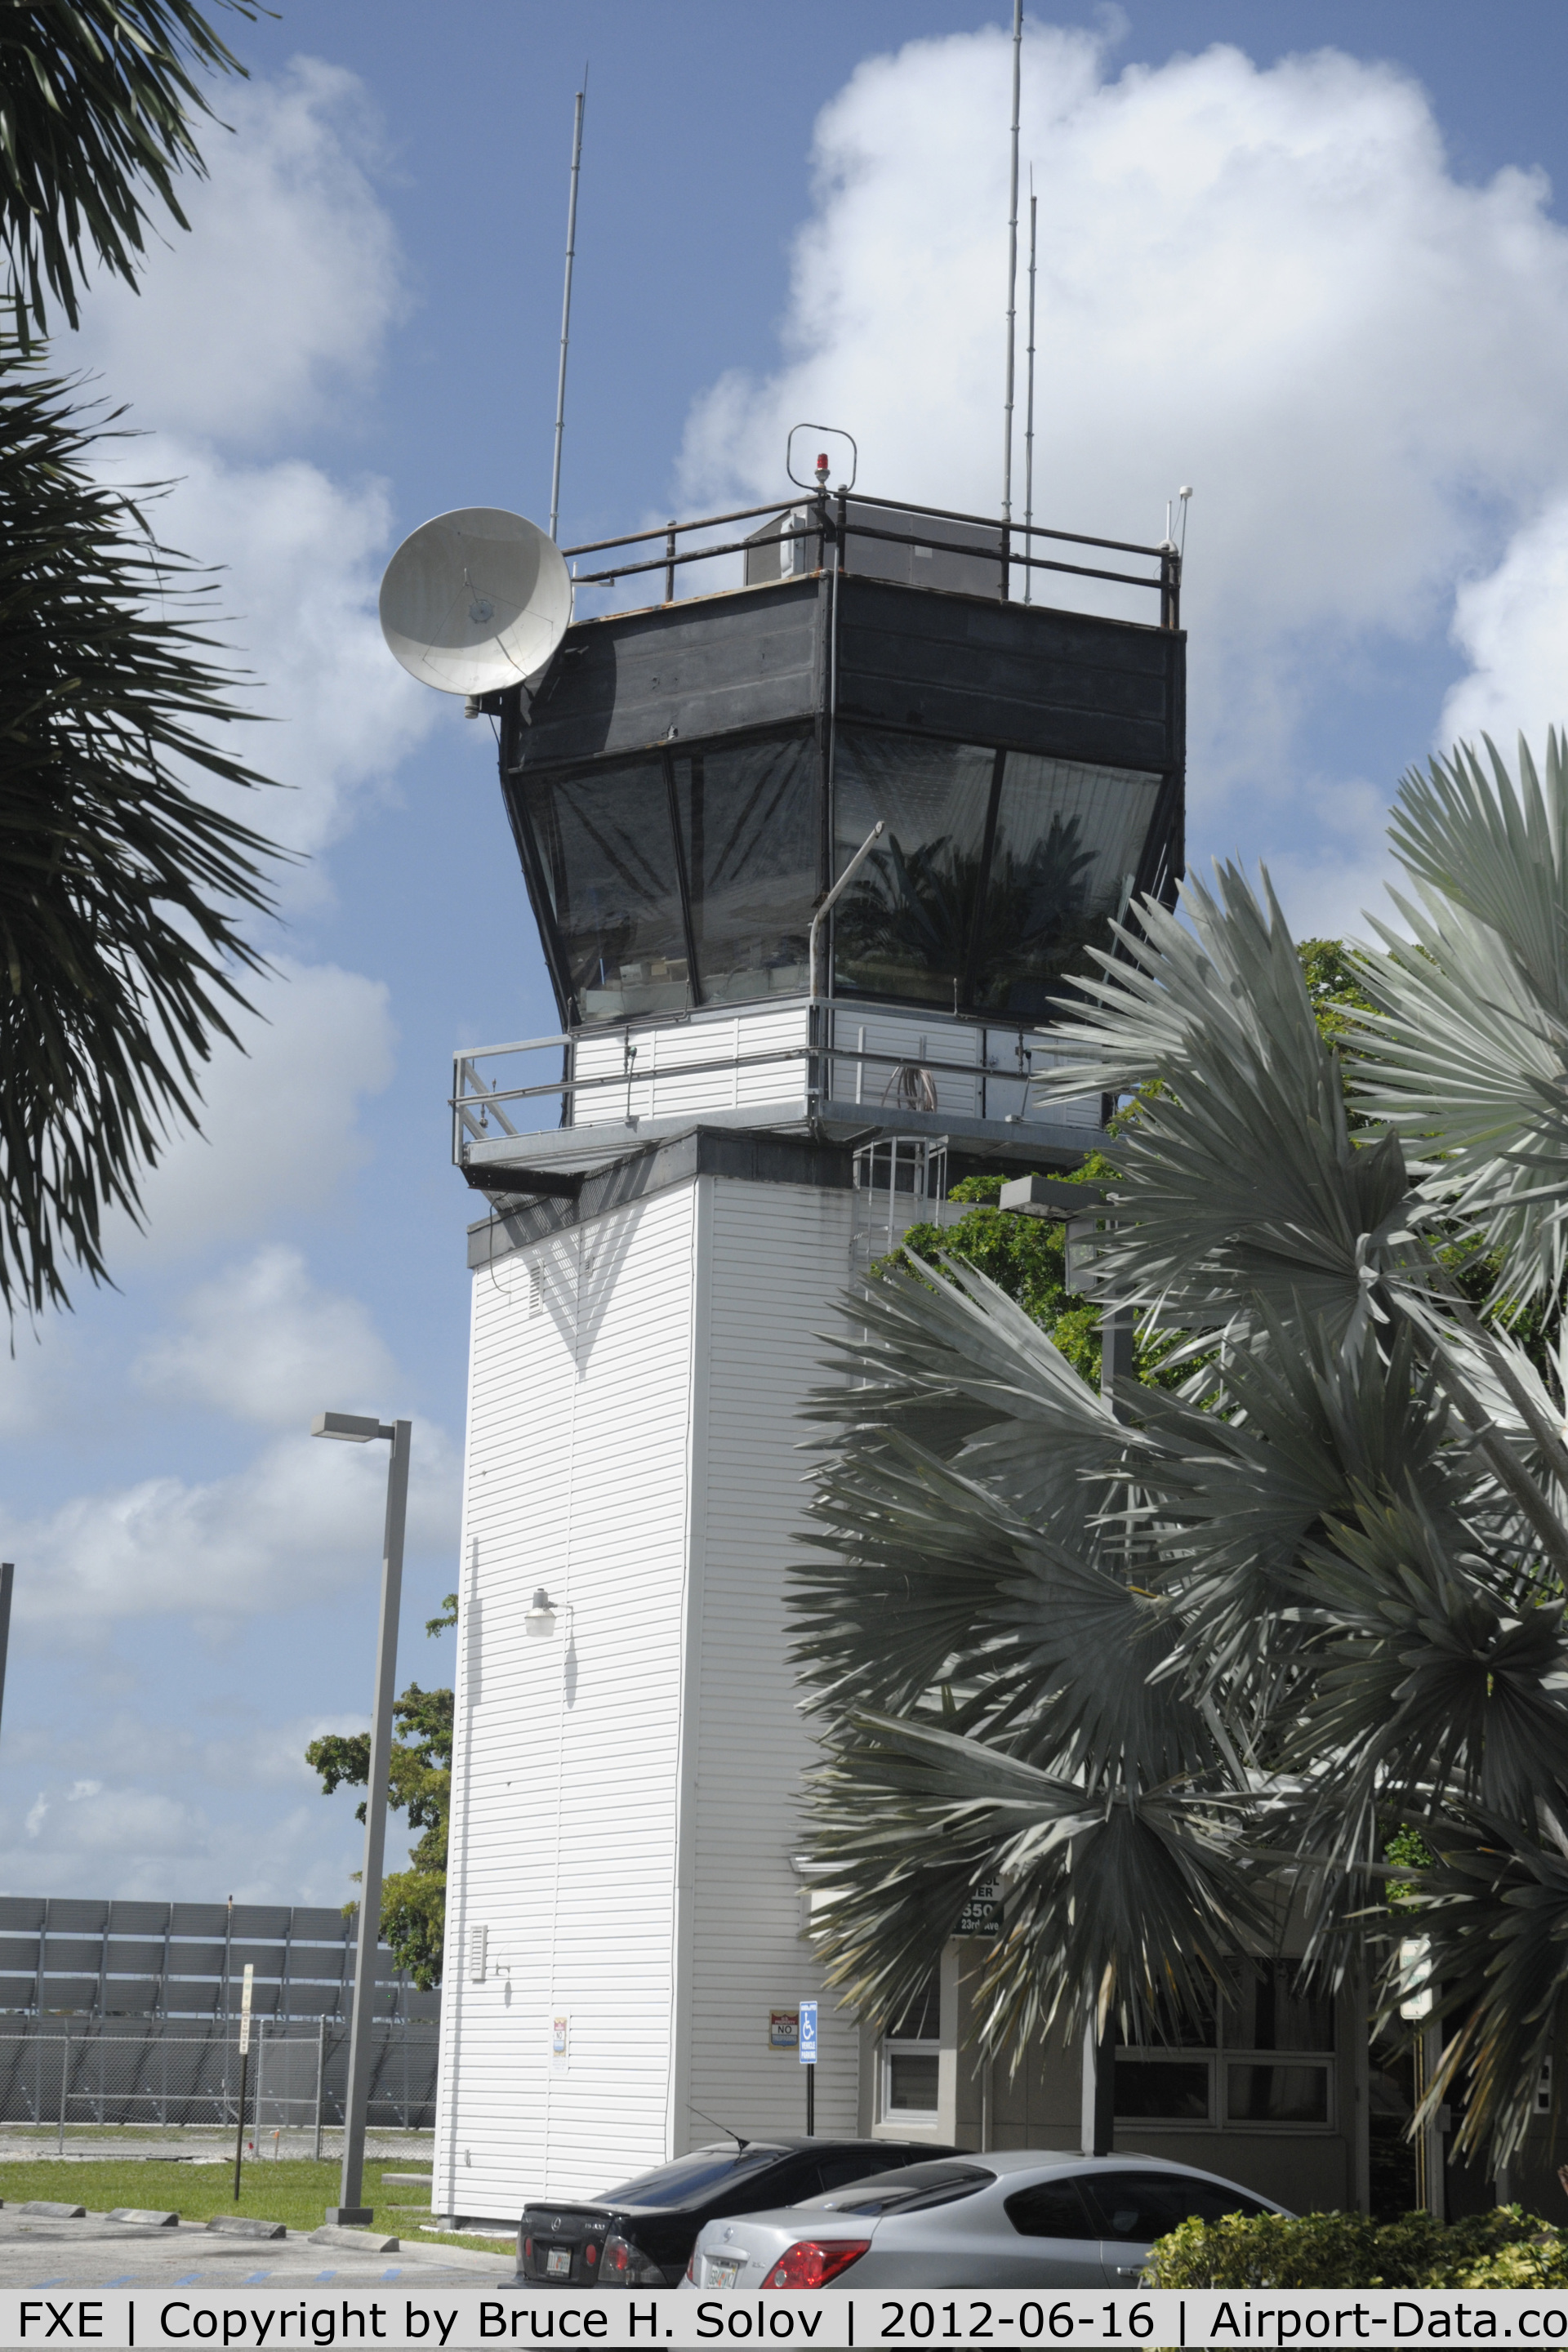 Fort Lauderdale Executive Airport (FXE) - The Air Traffic Control Tower at Ft. Lauderdale Executive Airport